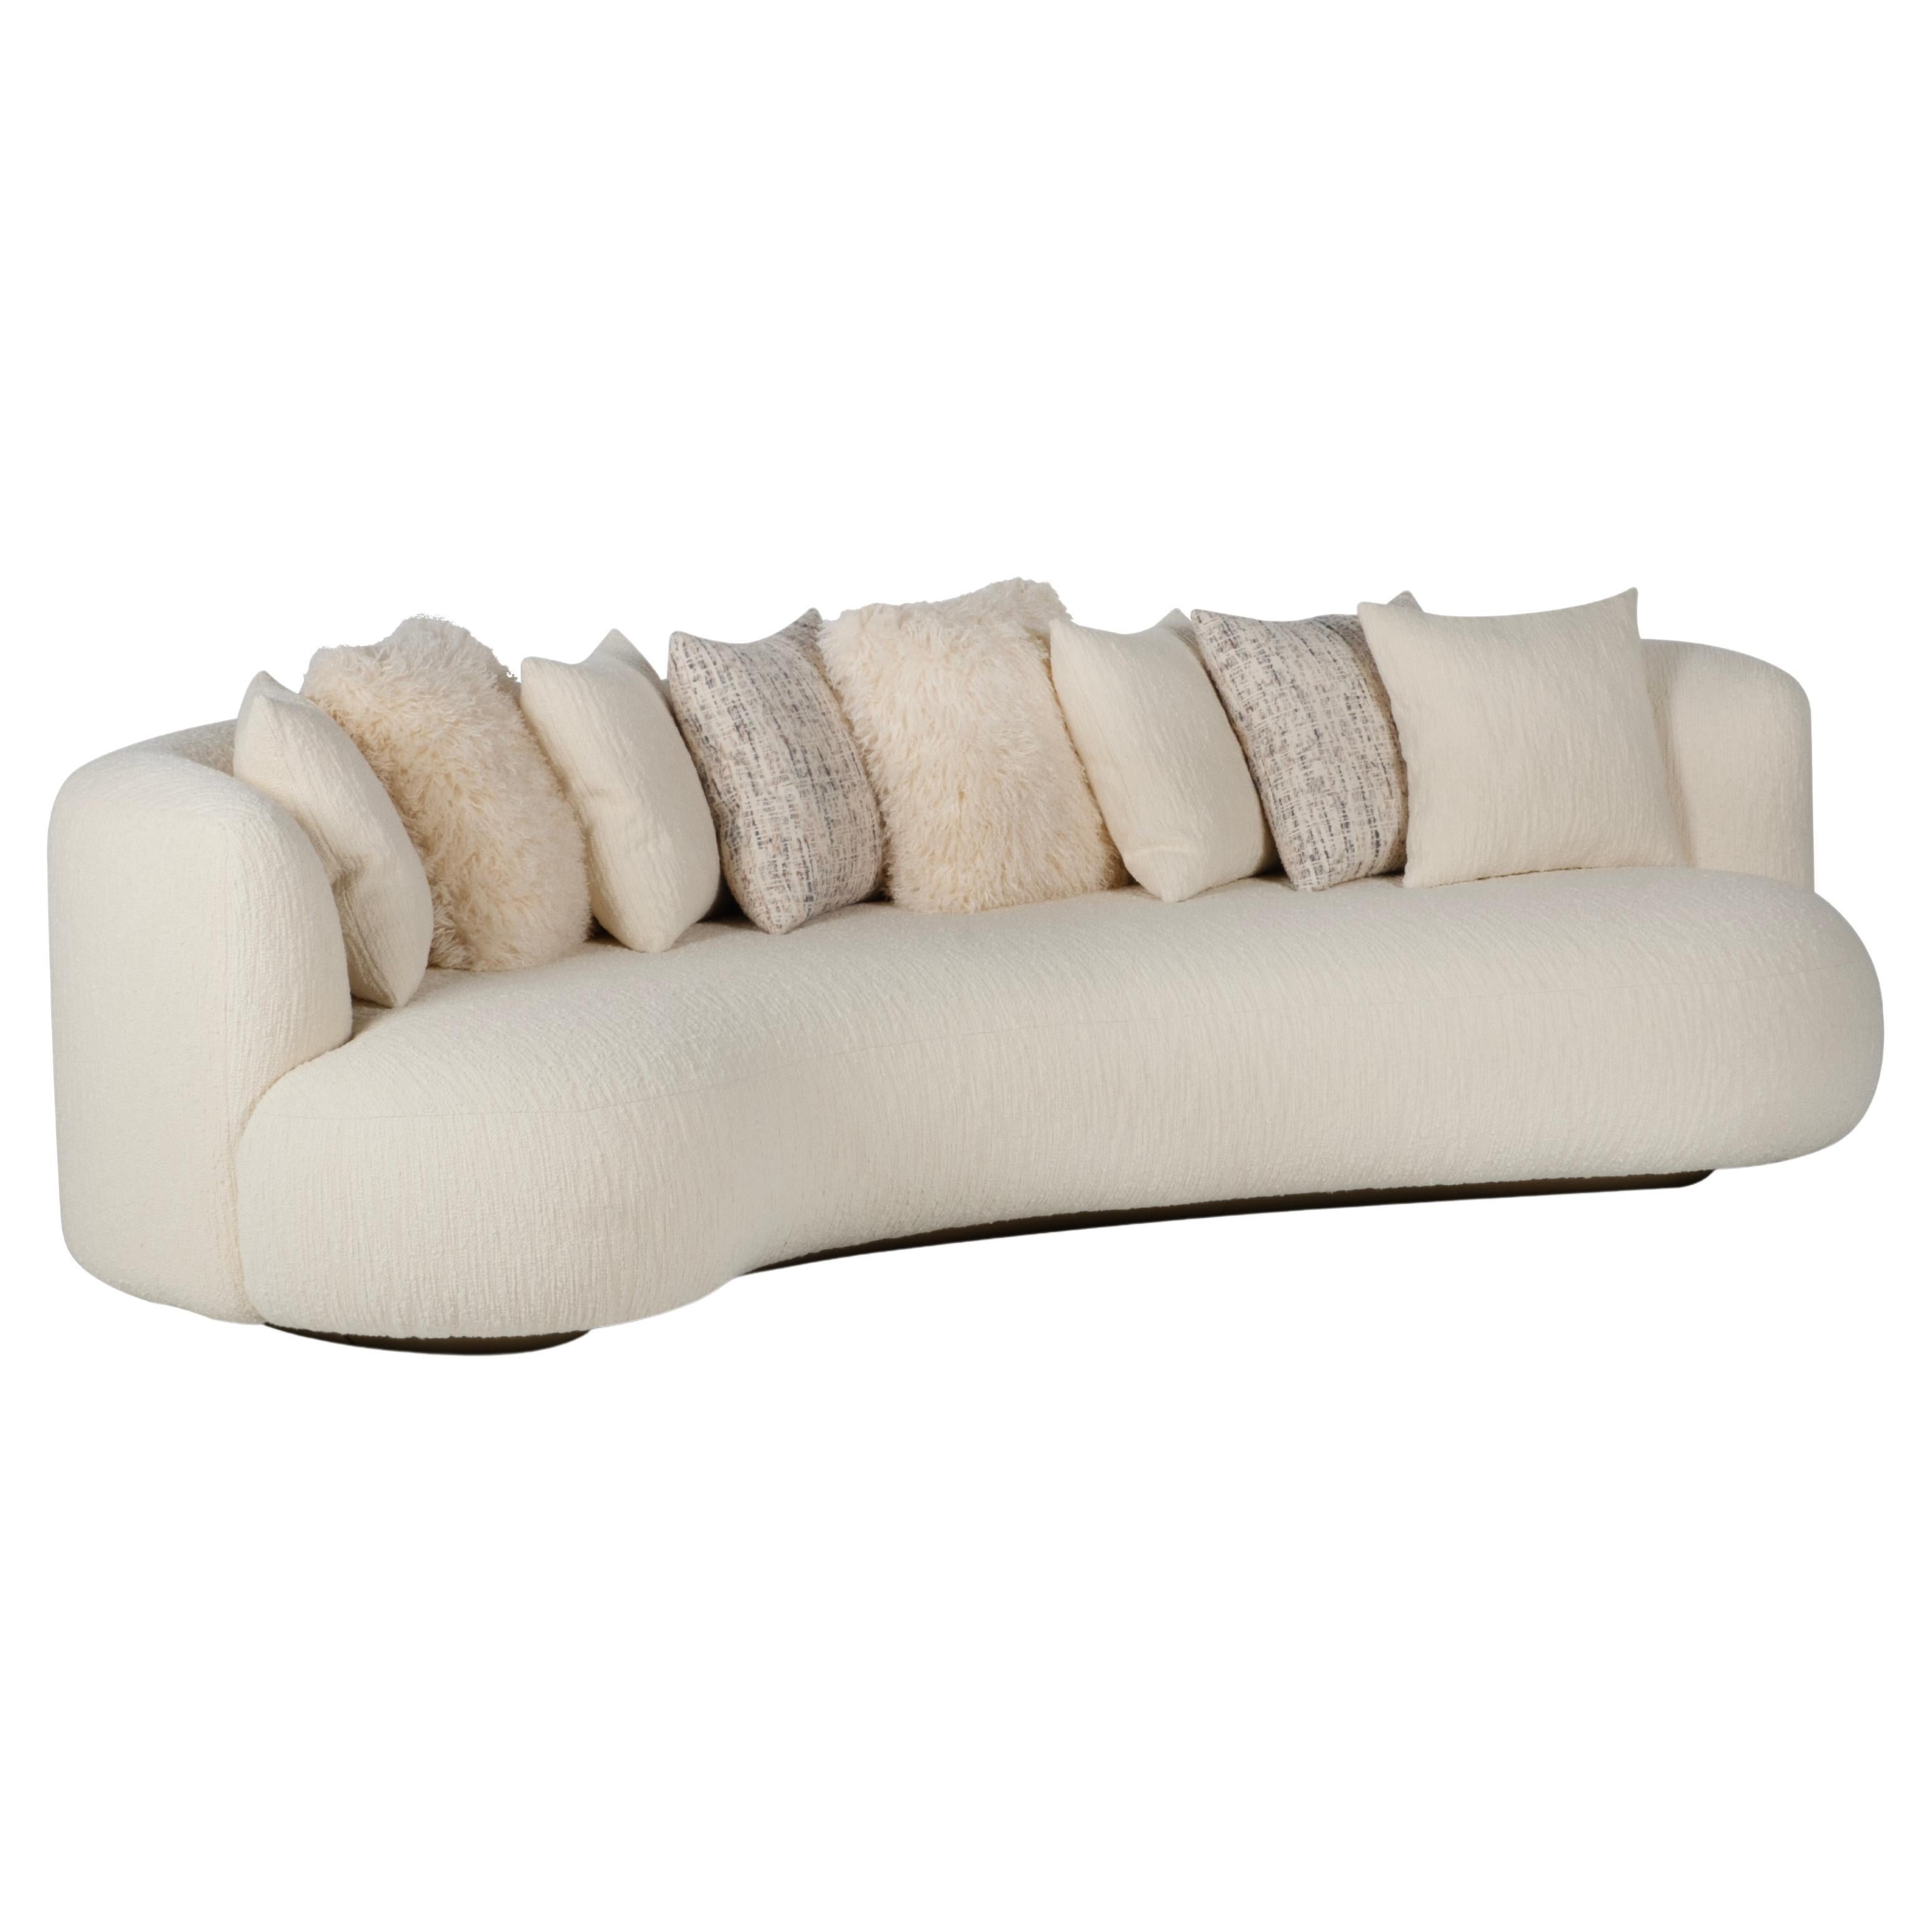 Modern Twins Curved Couch, Beige Bouclé, Handmade in Portugal by Greenapple